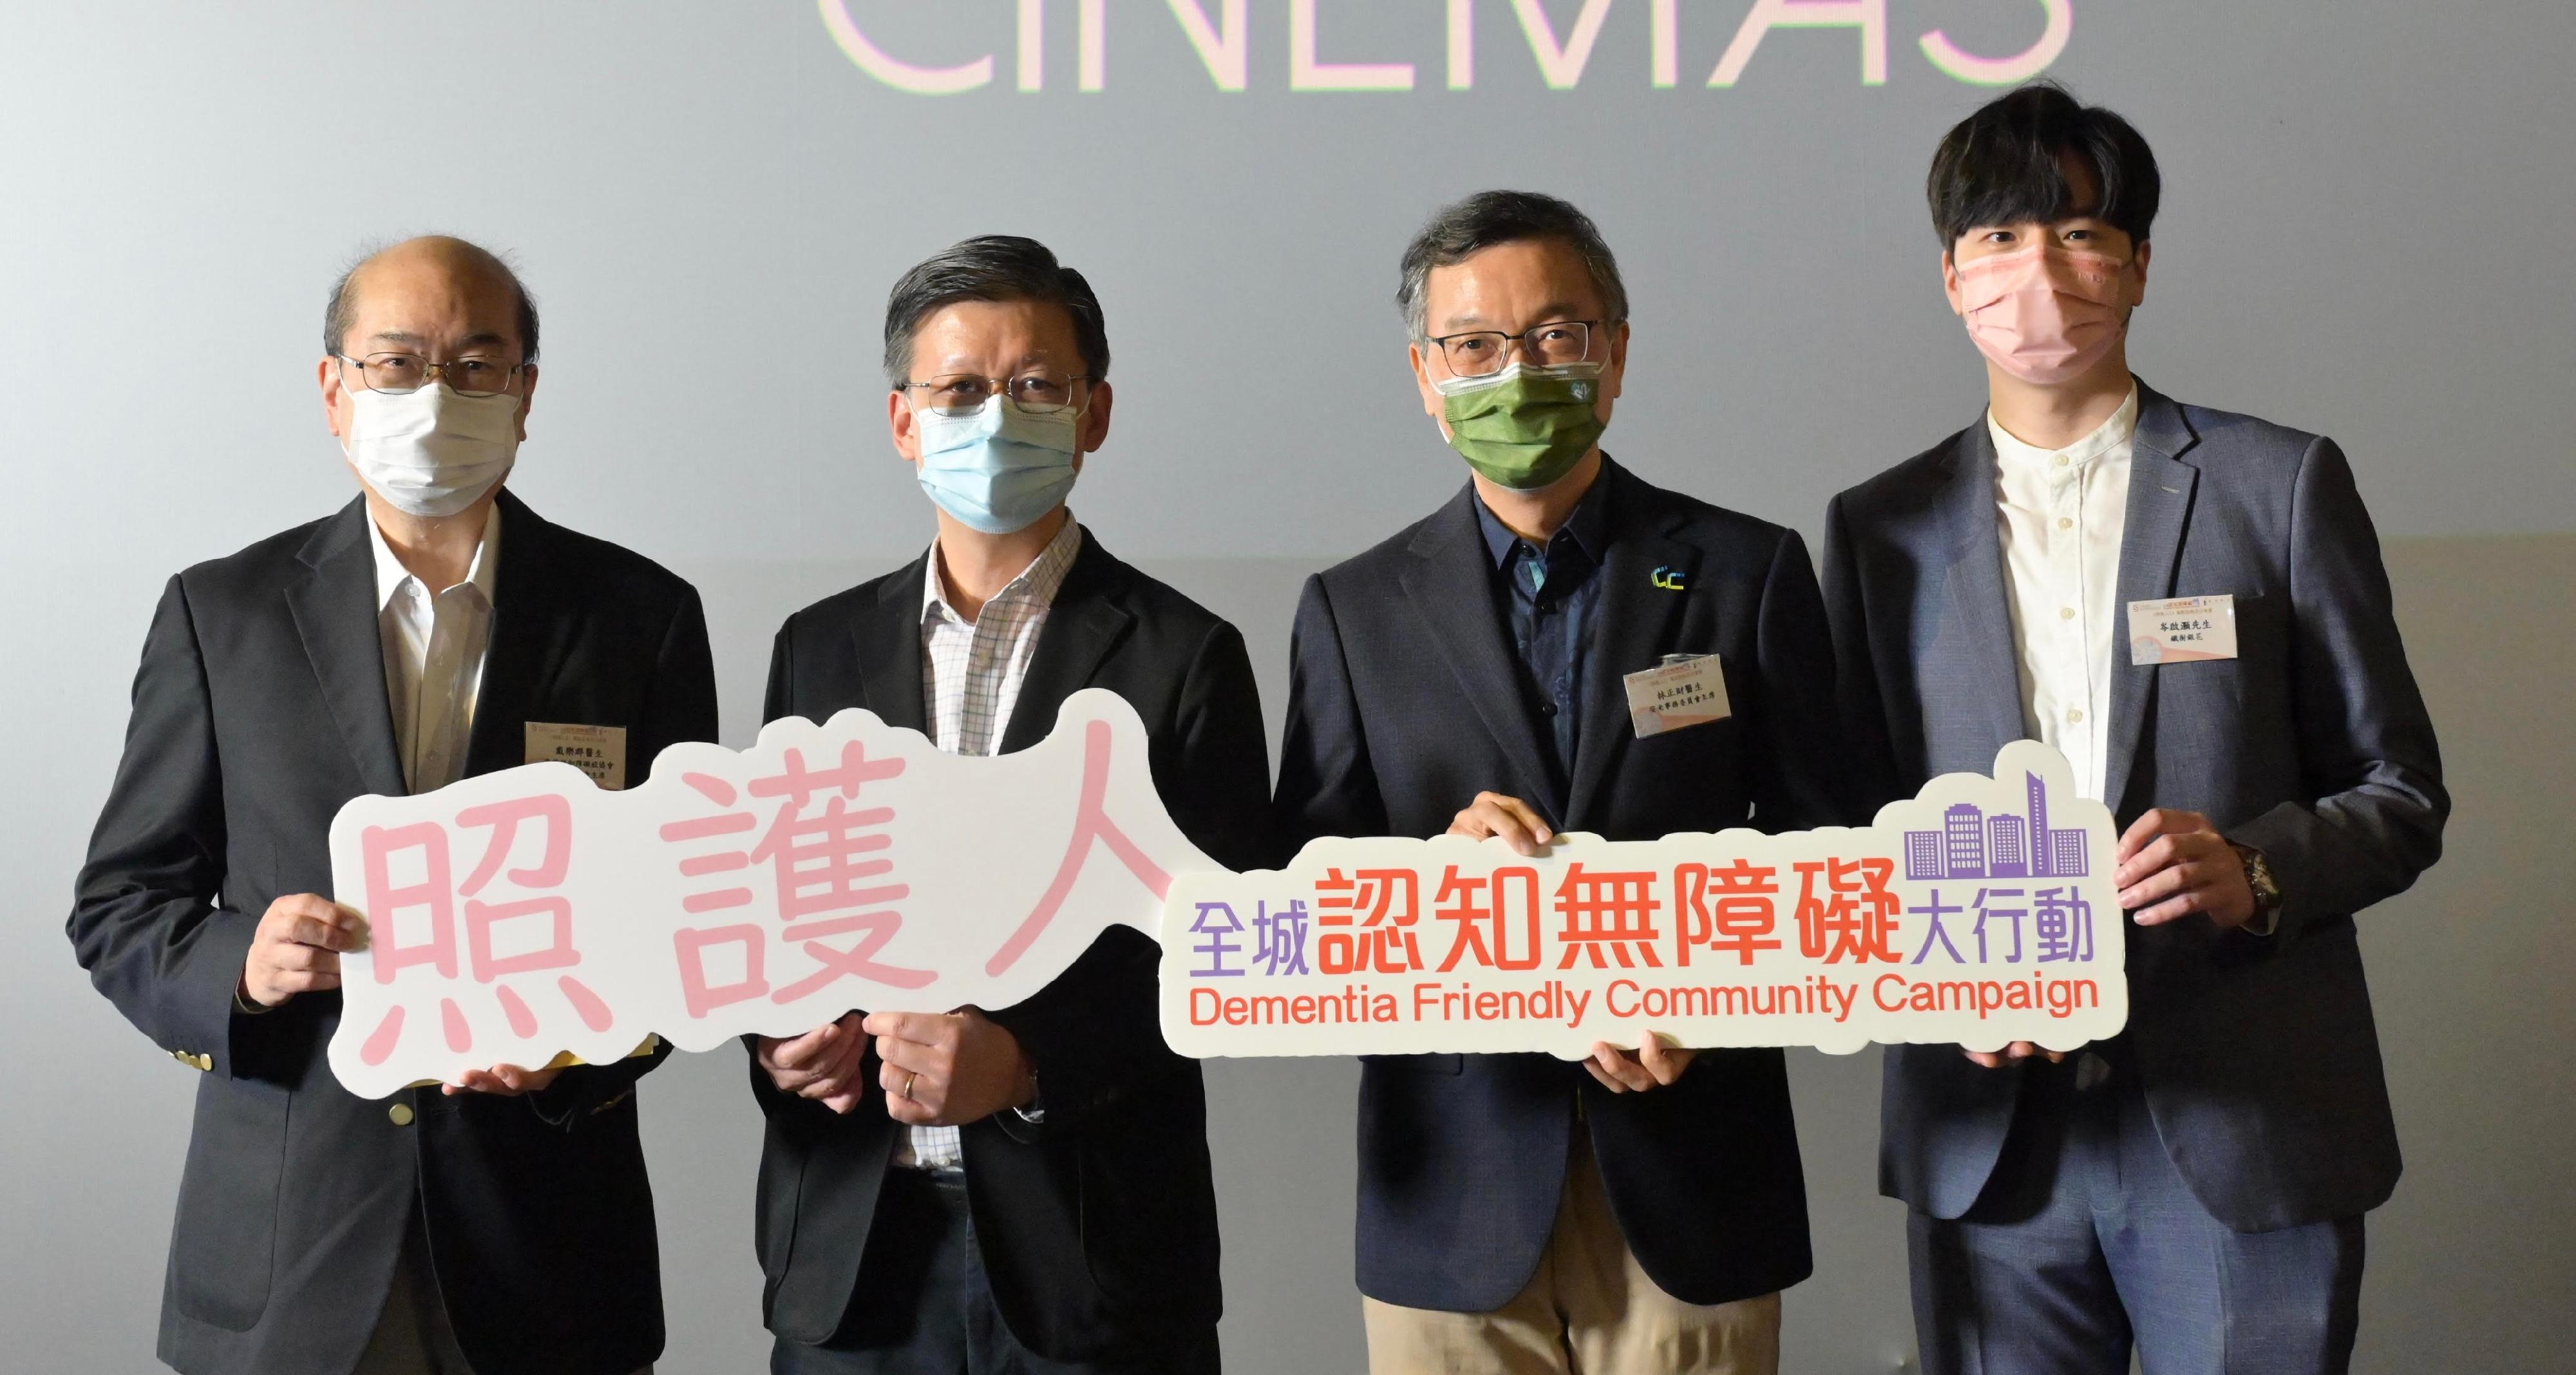 The Director of Social Welfare, Mr Gordon Leung (second left), and the Chairman of the Elderly Commission, Dr Lam Ching-choi (third left), are pictured with other guests at the "CareNin2" movie screening and sharing session of the Dementia Friendly Community Campaign today (December 12).